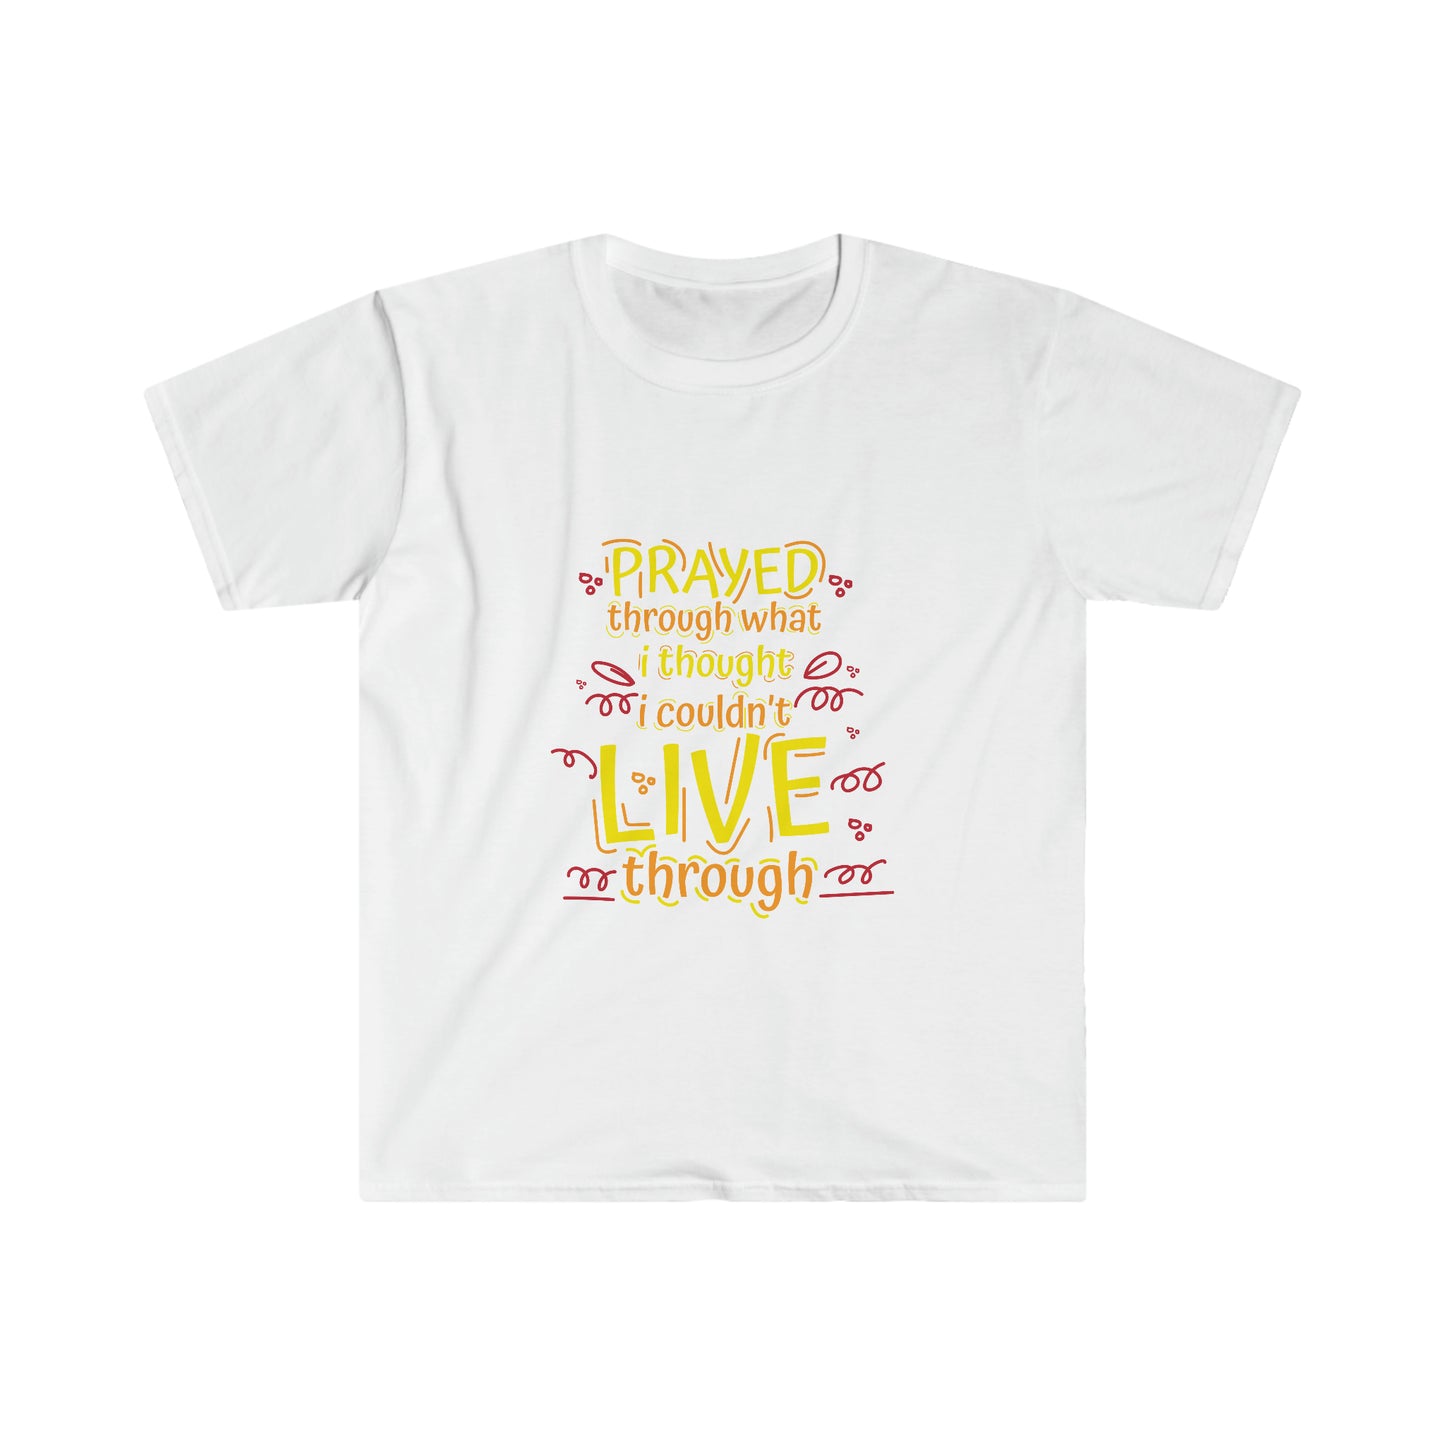 Prayed Through What I Thought I Couldn't Live Through Unisex T-shirt